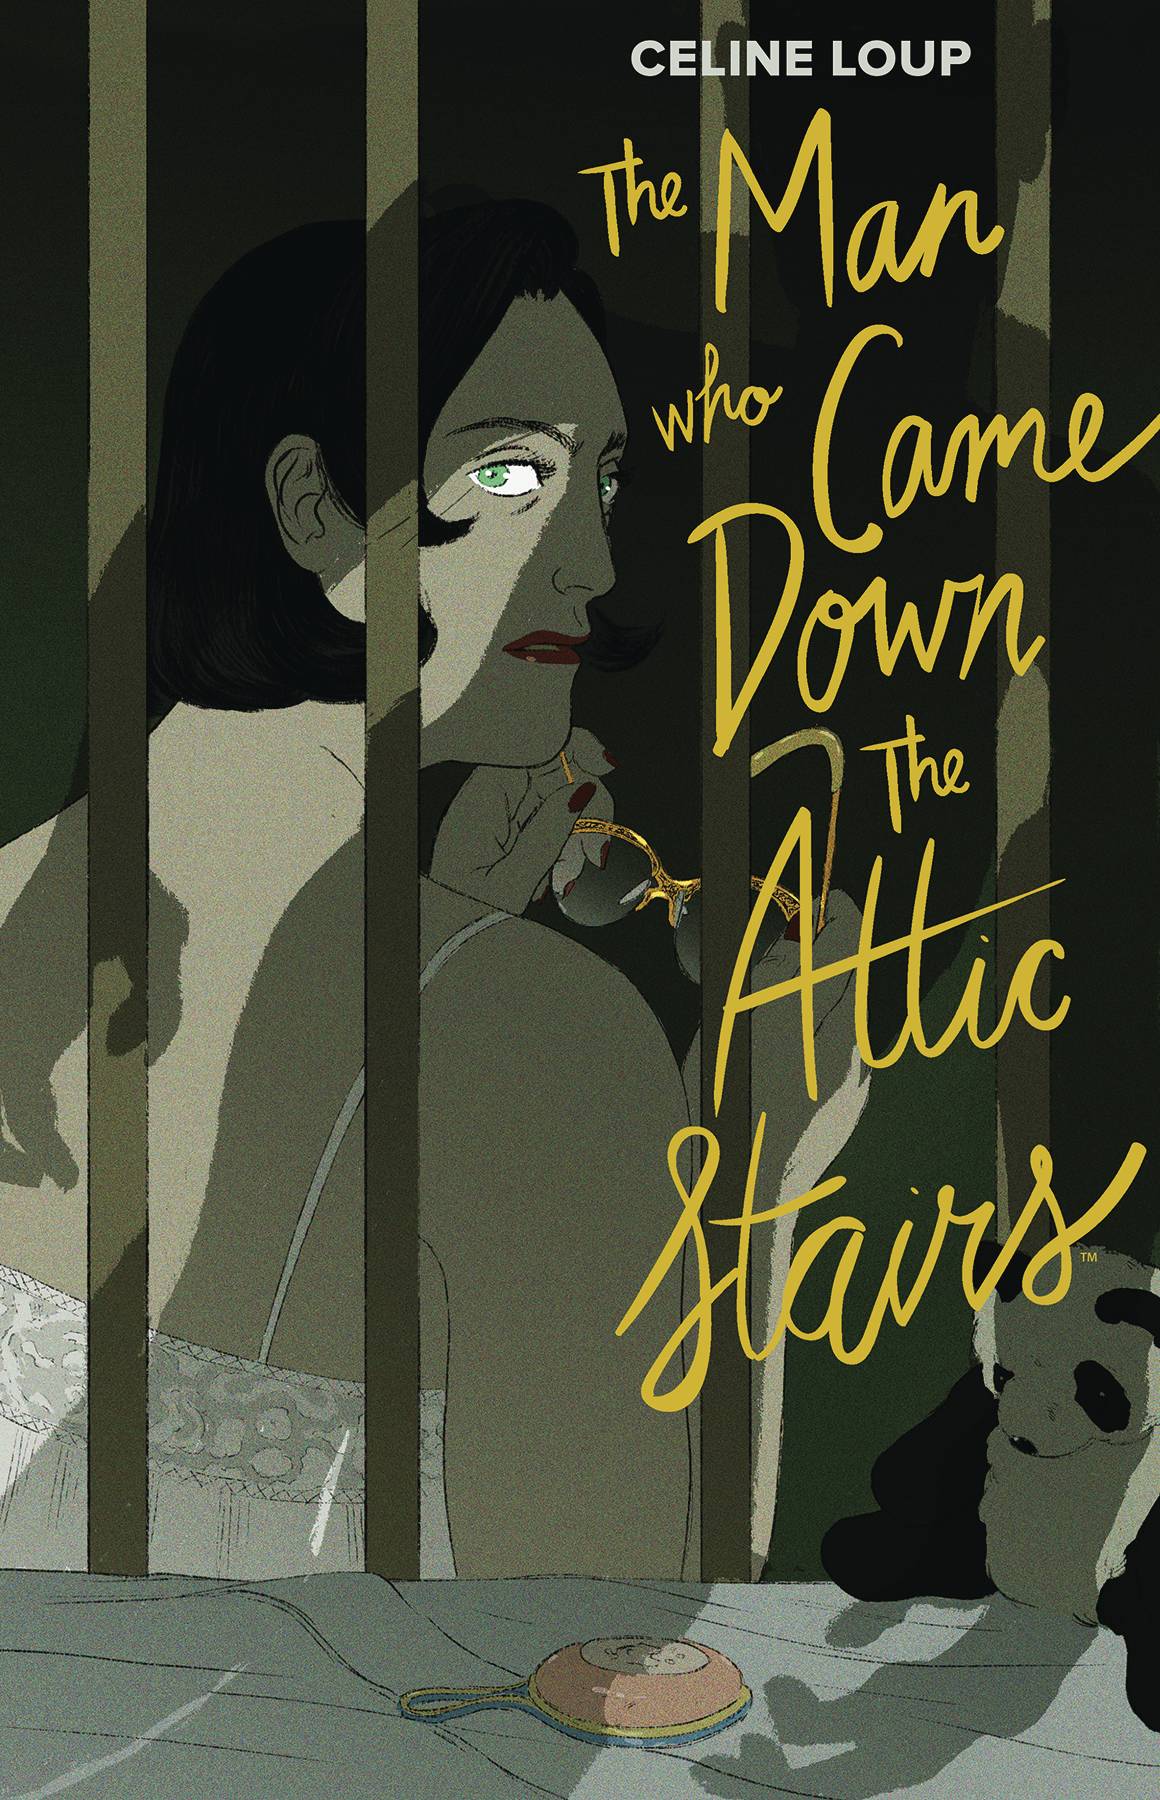 Man Who Came Down Attic Stairs Hardcover